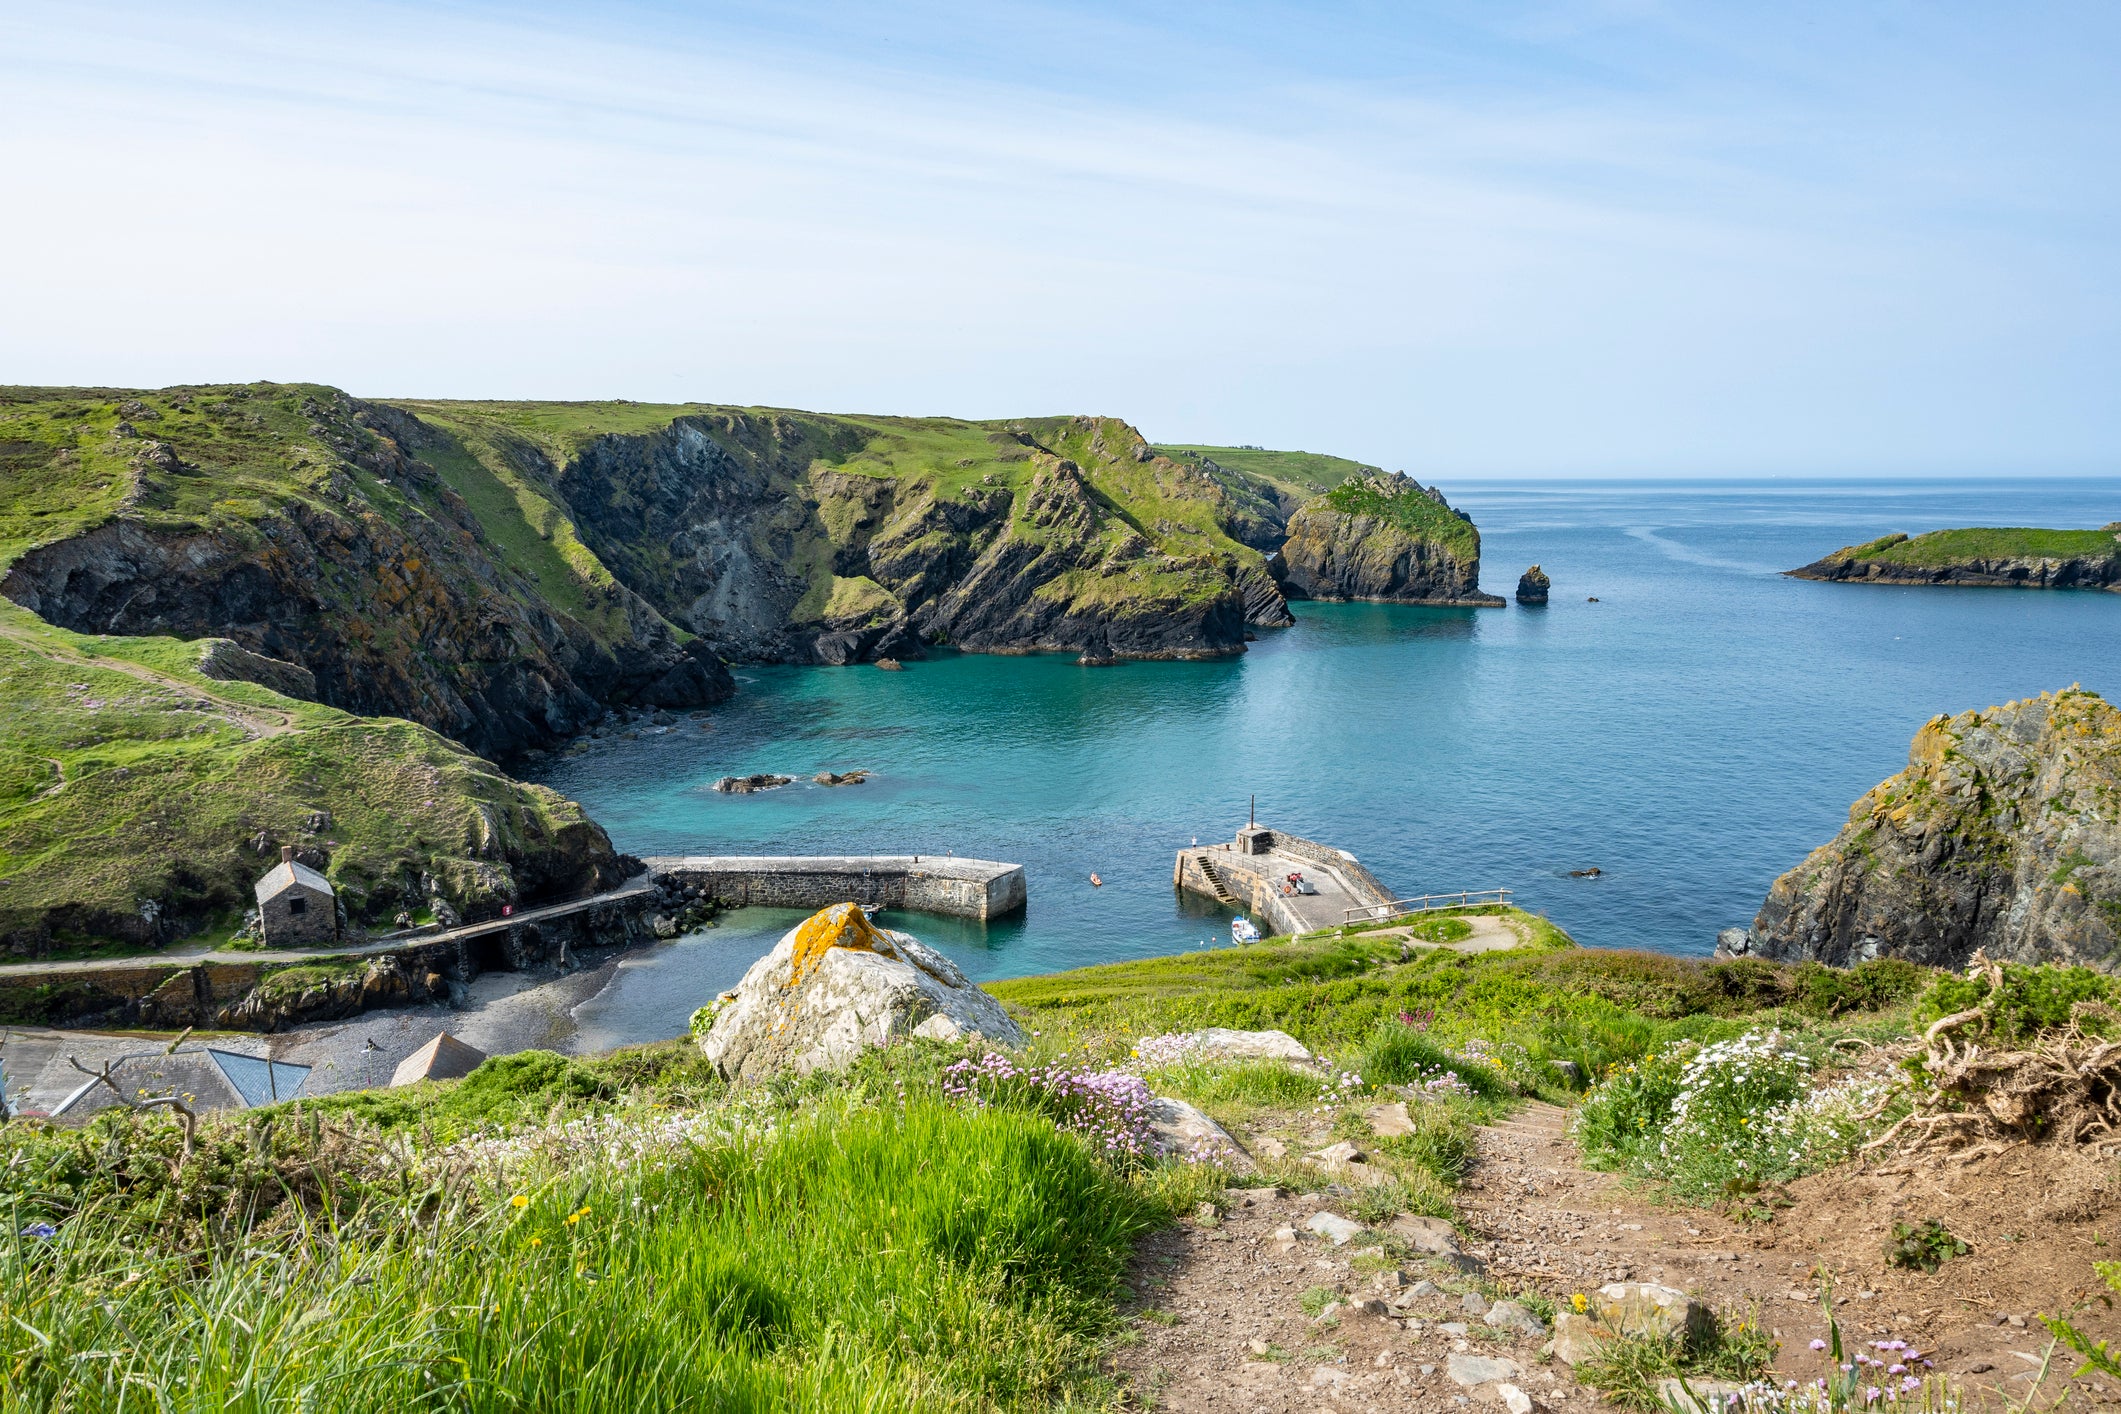 England’s longest marked footpath, the South West Coast Path runs for 630 miles